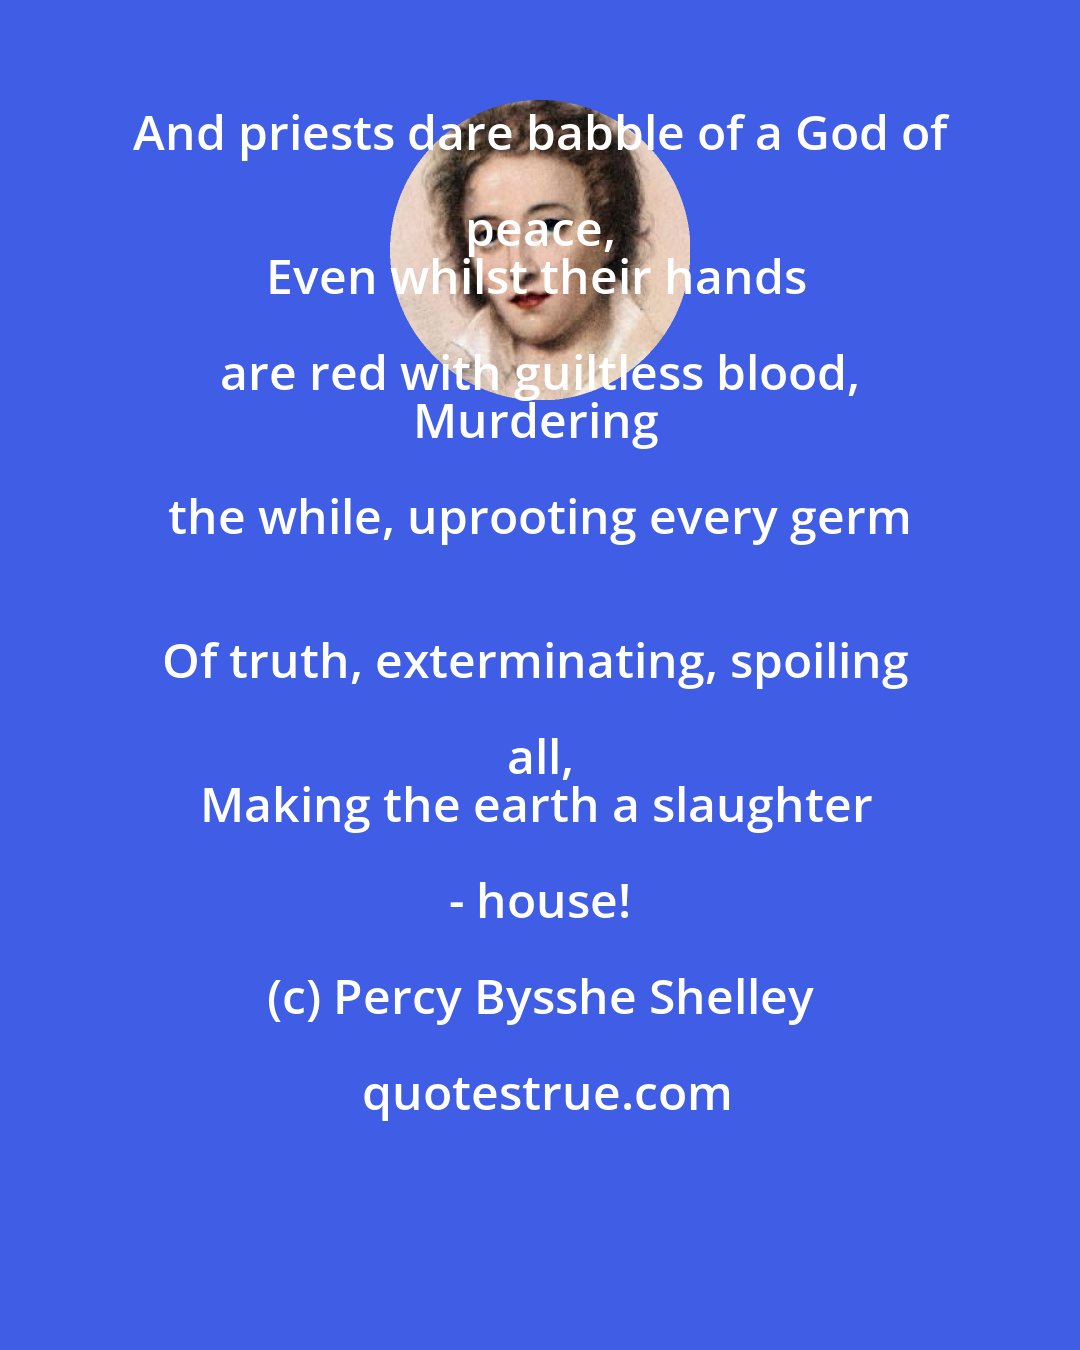 Percy Bysshe Shelley: And priests dare babble of a God of peace, 
Even whilst their hands are red with guiltless blood, 
Murdering the while, uprooting every germ 
Of truth, exterminating, spoiling all, 
Making the earth a slaughter - house!